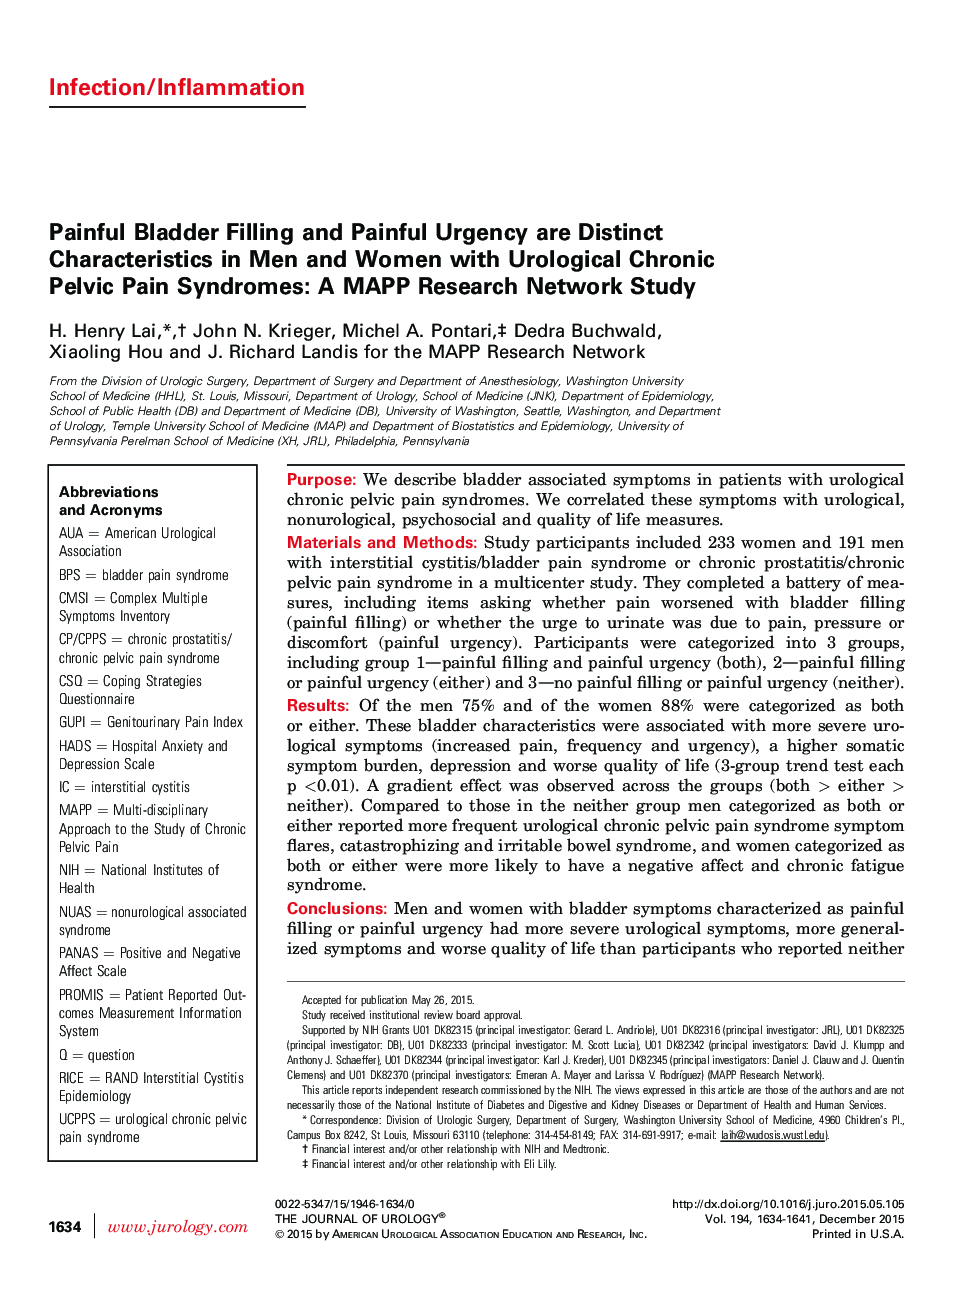 Painful Bladder Filling and Painful Urgency are Distinct Characteristics in Men and Women with Urological Chronic Pelvic Pain Syndromes: A MAPP Research Network Study